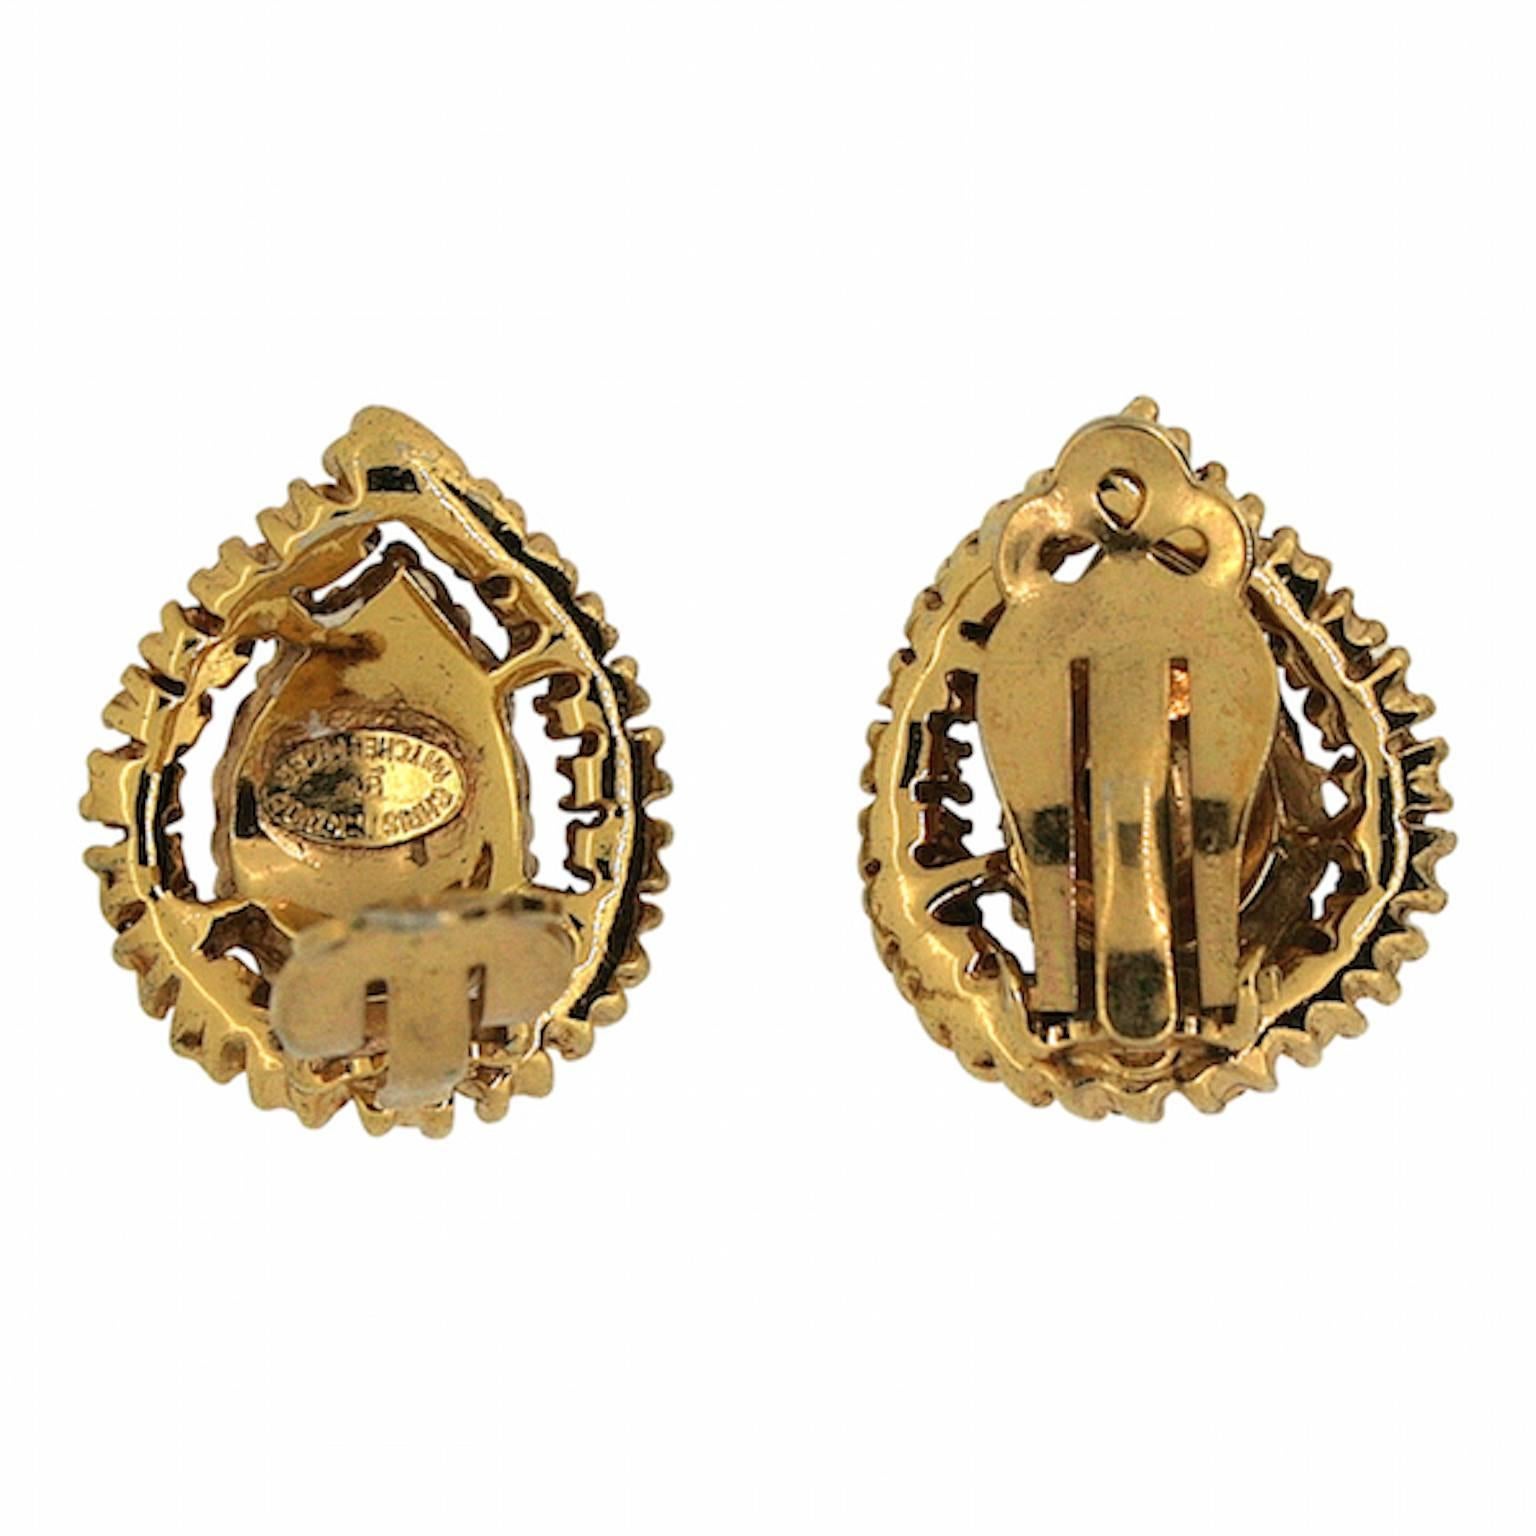 These stunning clip earrings illustrate the fine craftsmanship and innovative design of Christian Dior by Mitchel Maer jewellery. They are a piece to be favoured by collectors and connoisseurs of beautiful design.
Condition Report:
Excellent
The